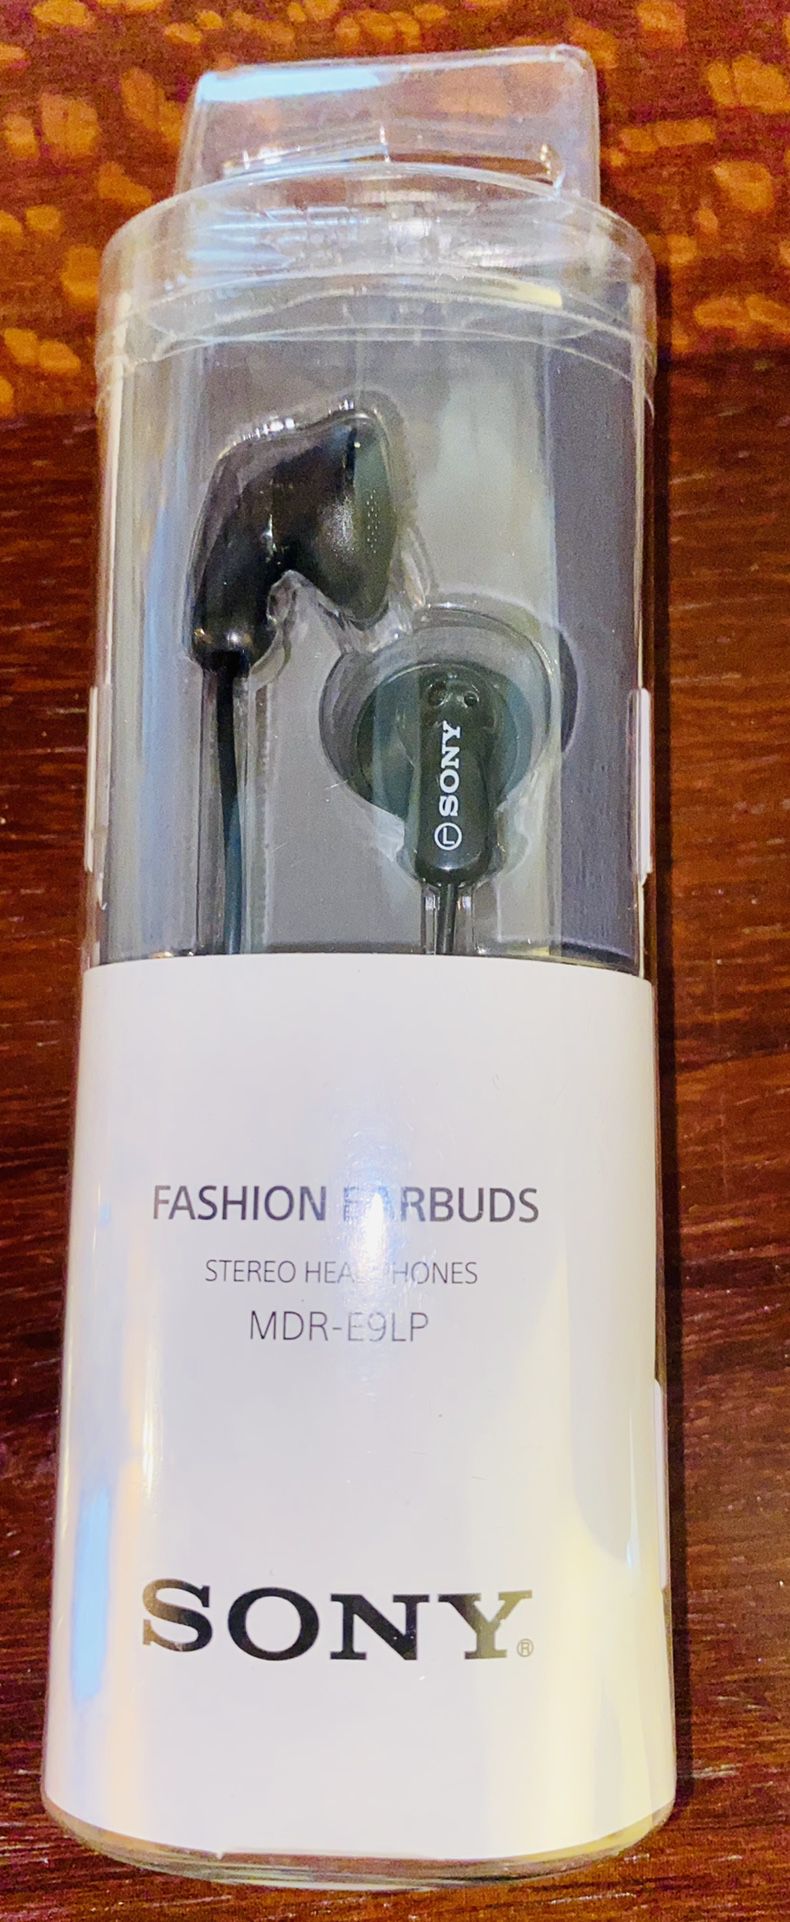 SONY Fashion Earbuds MDR-E9LP